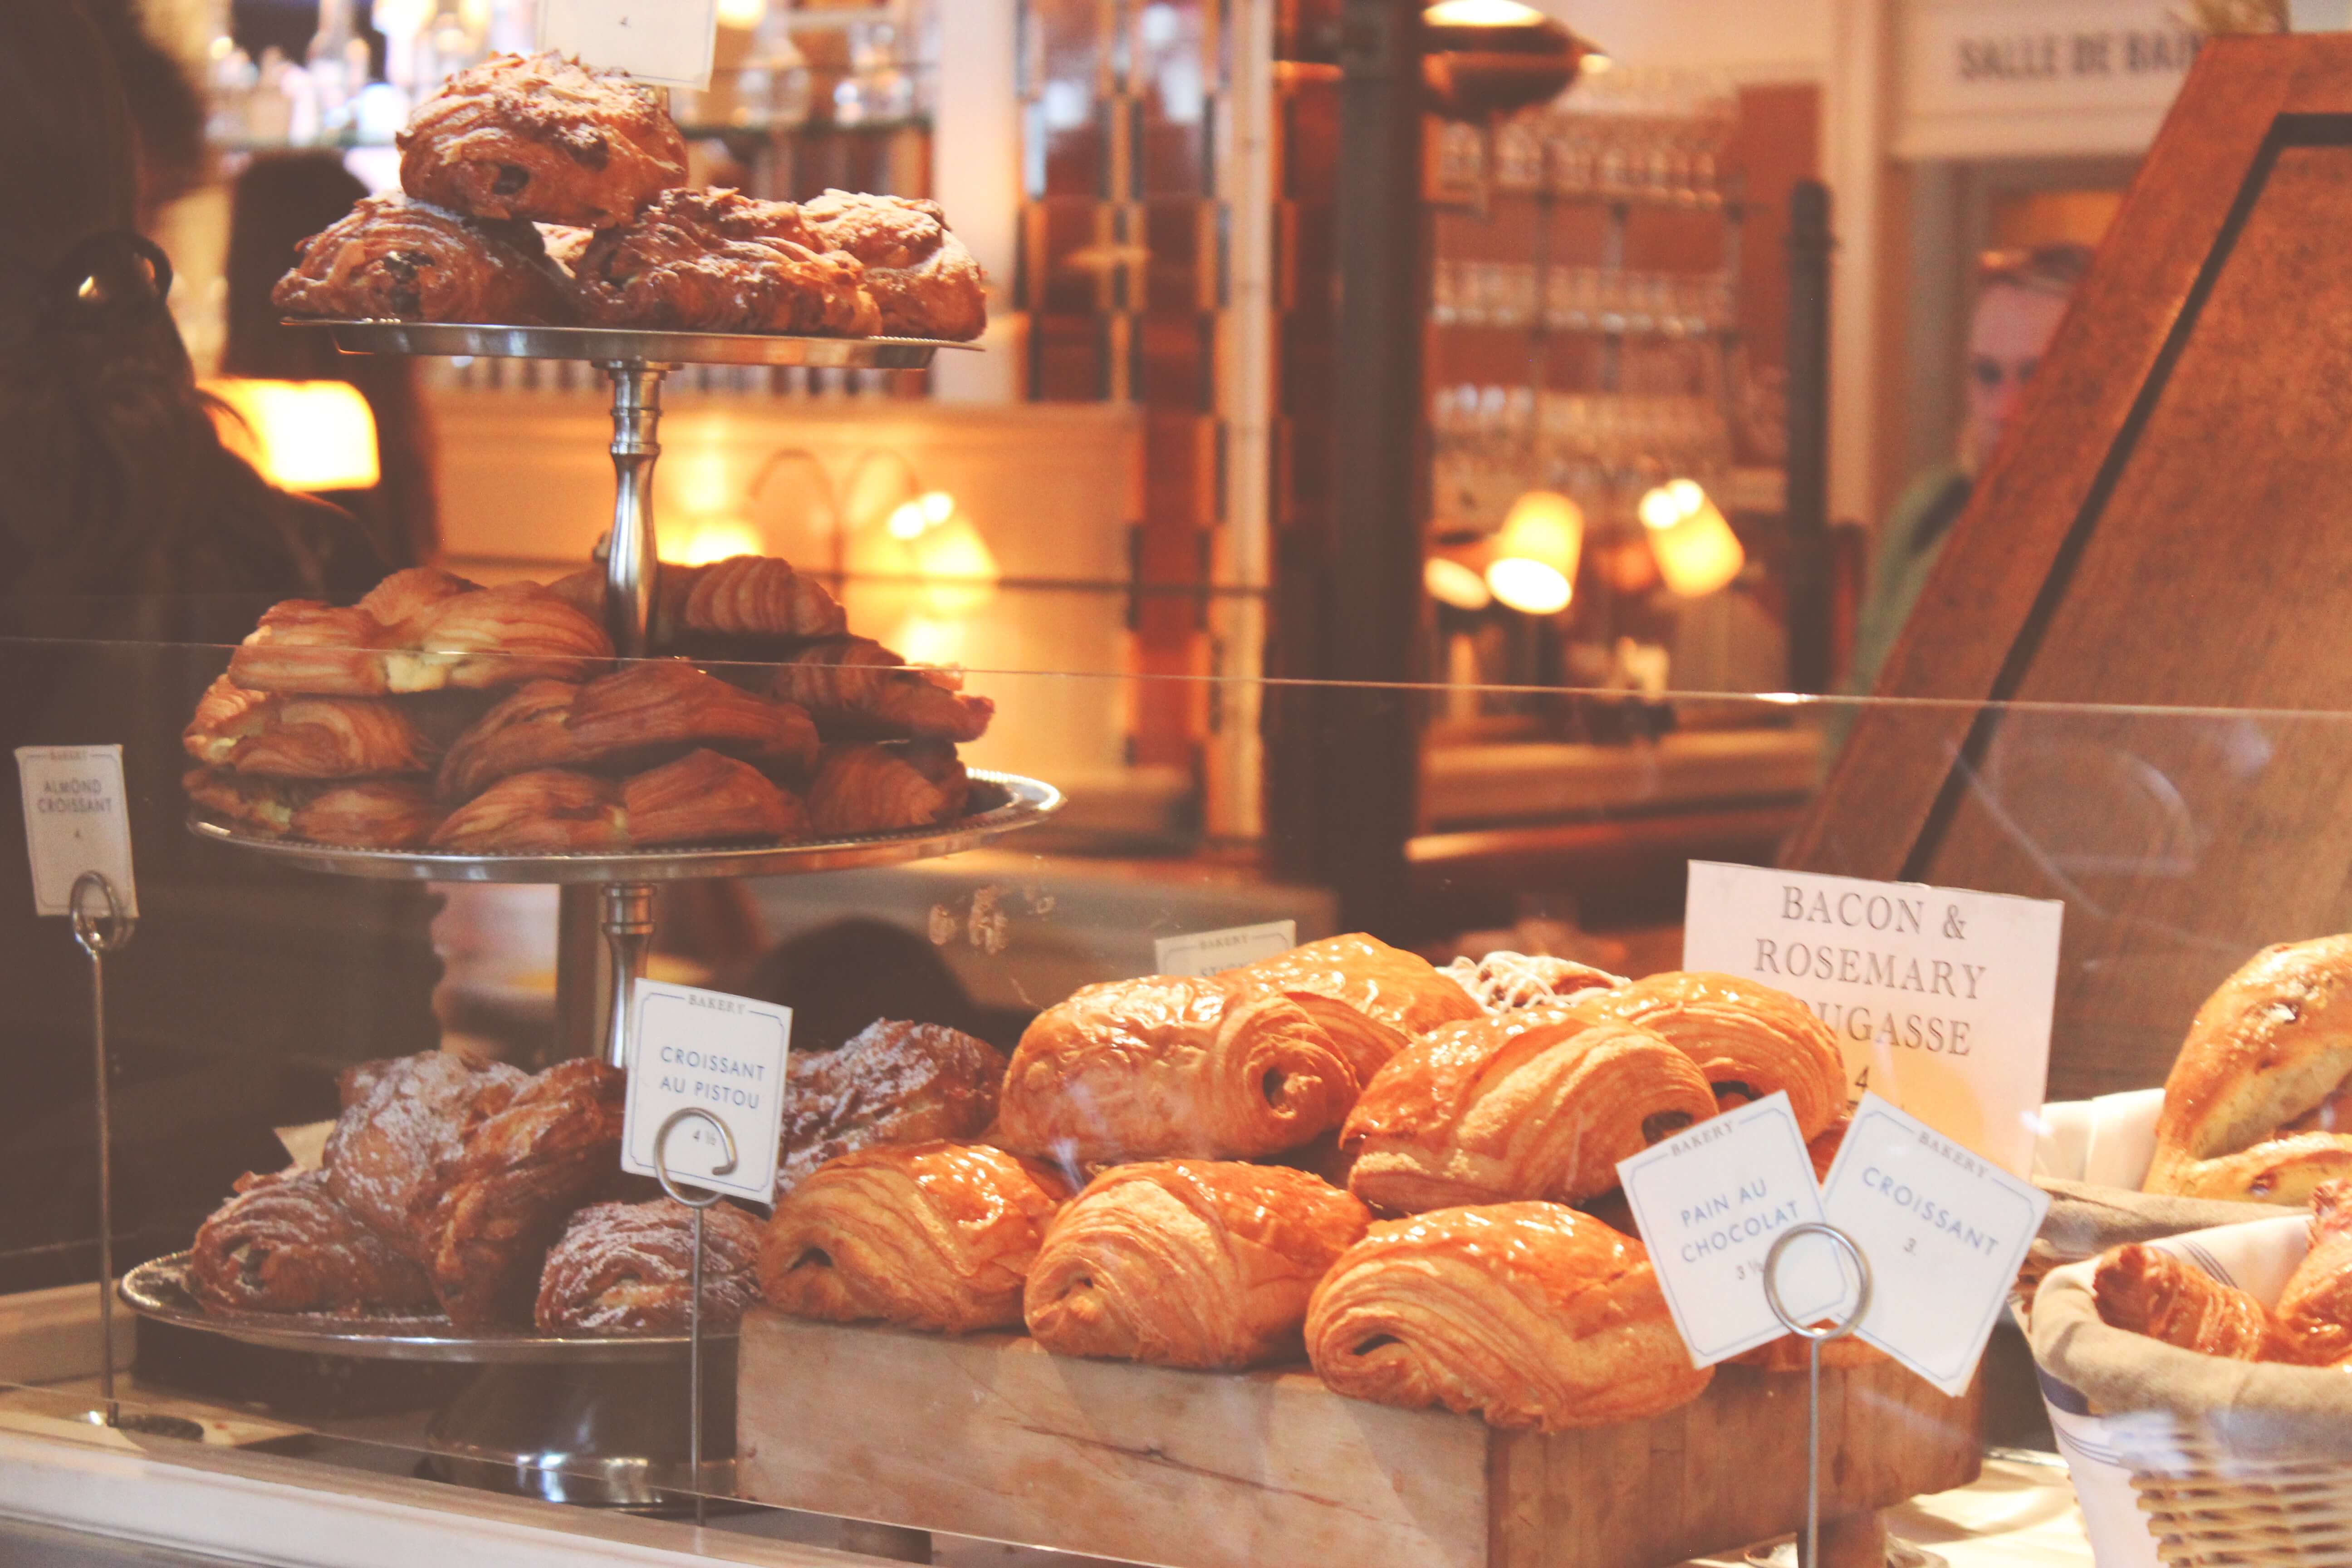 THE 5 BEST BAKERIES IN BUDAPEST 2022